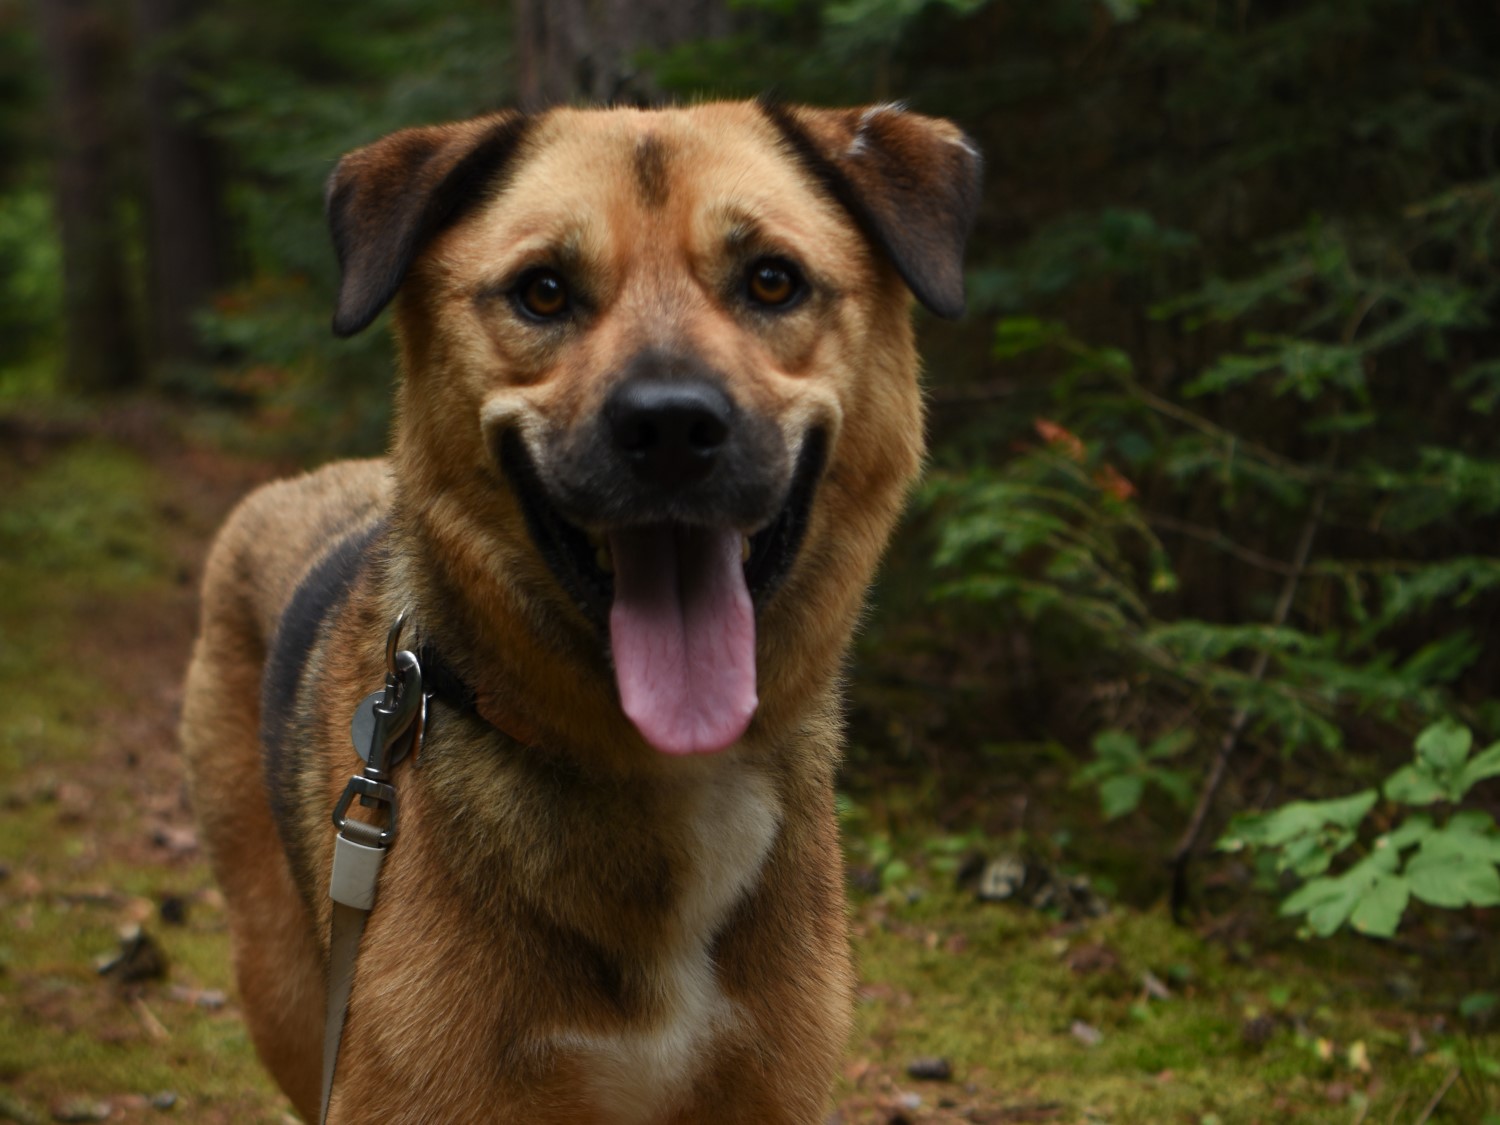 A light brown dog on a leash in the forest, looking at the camera and smiling